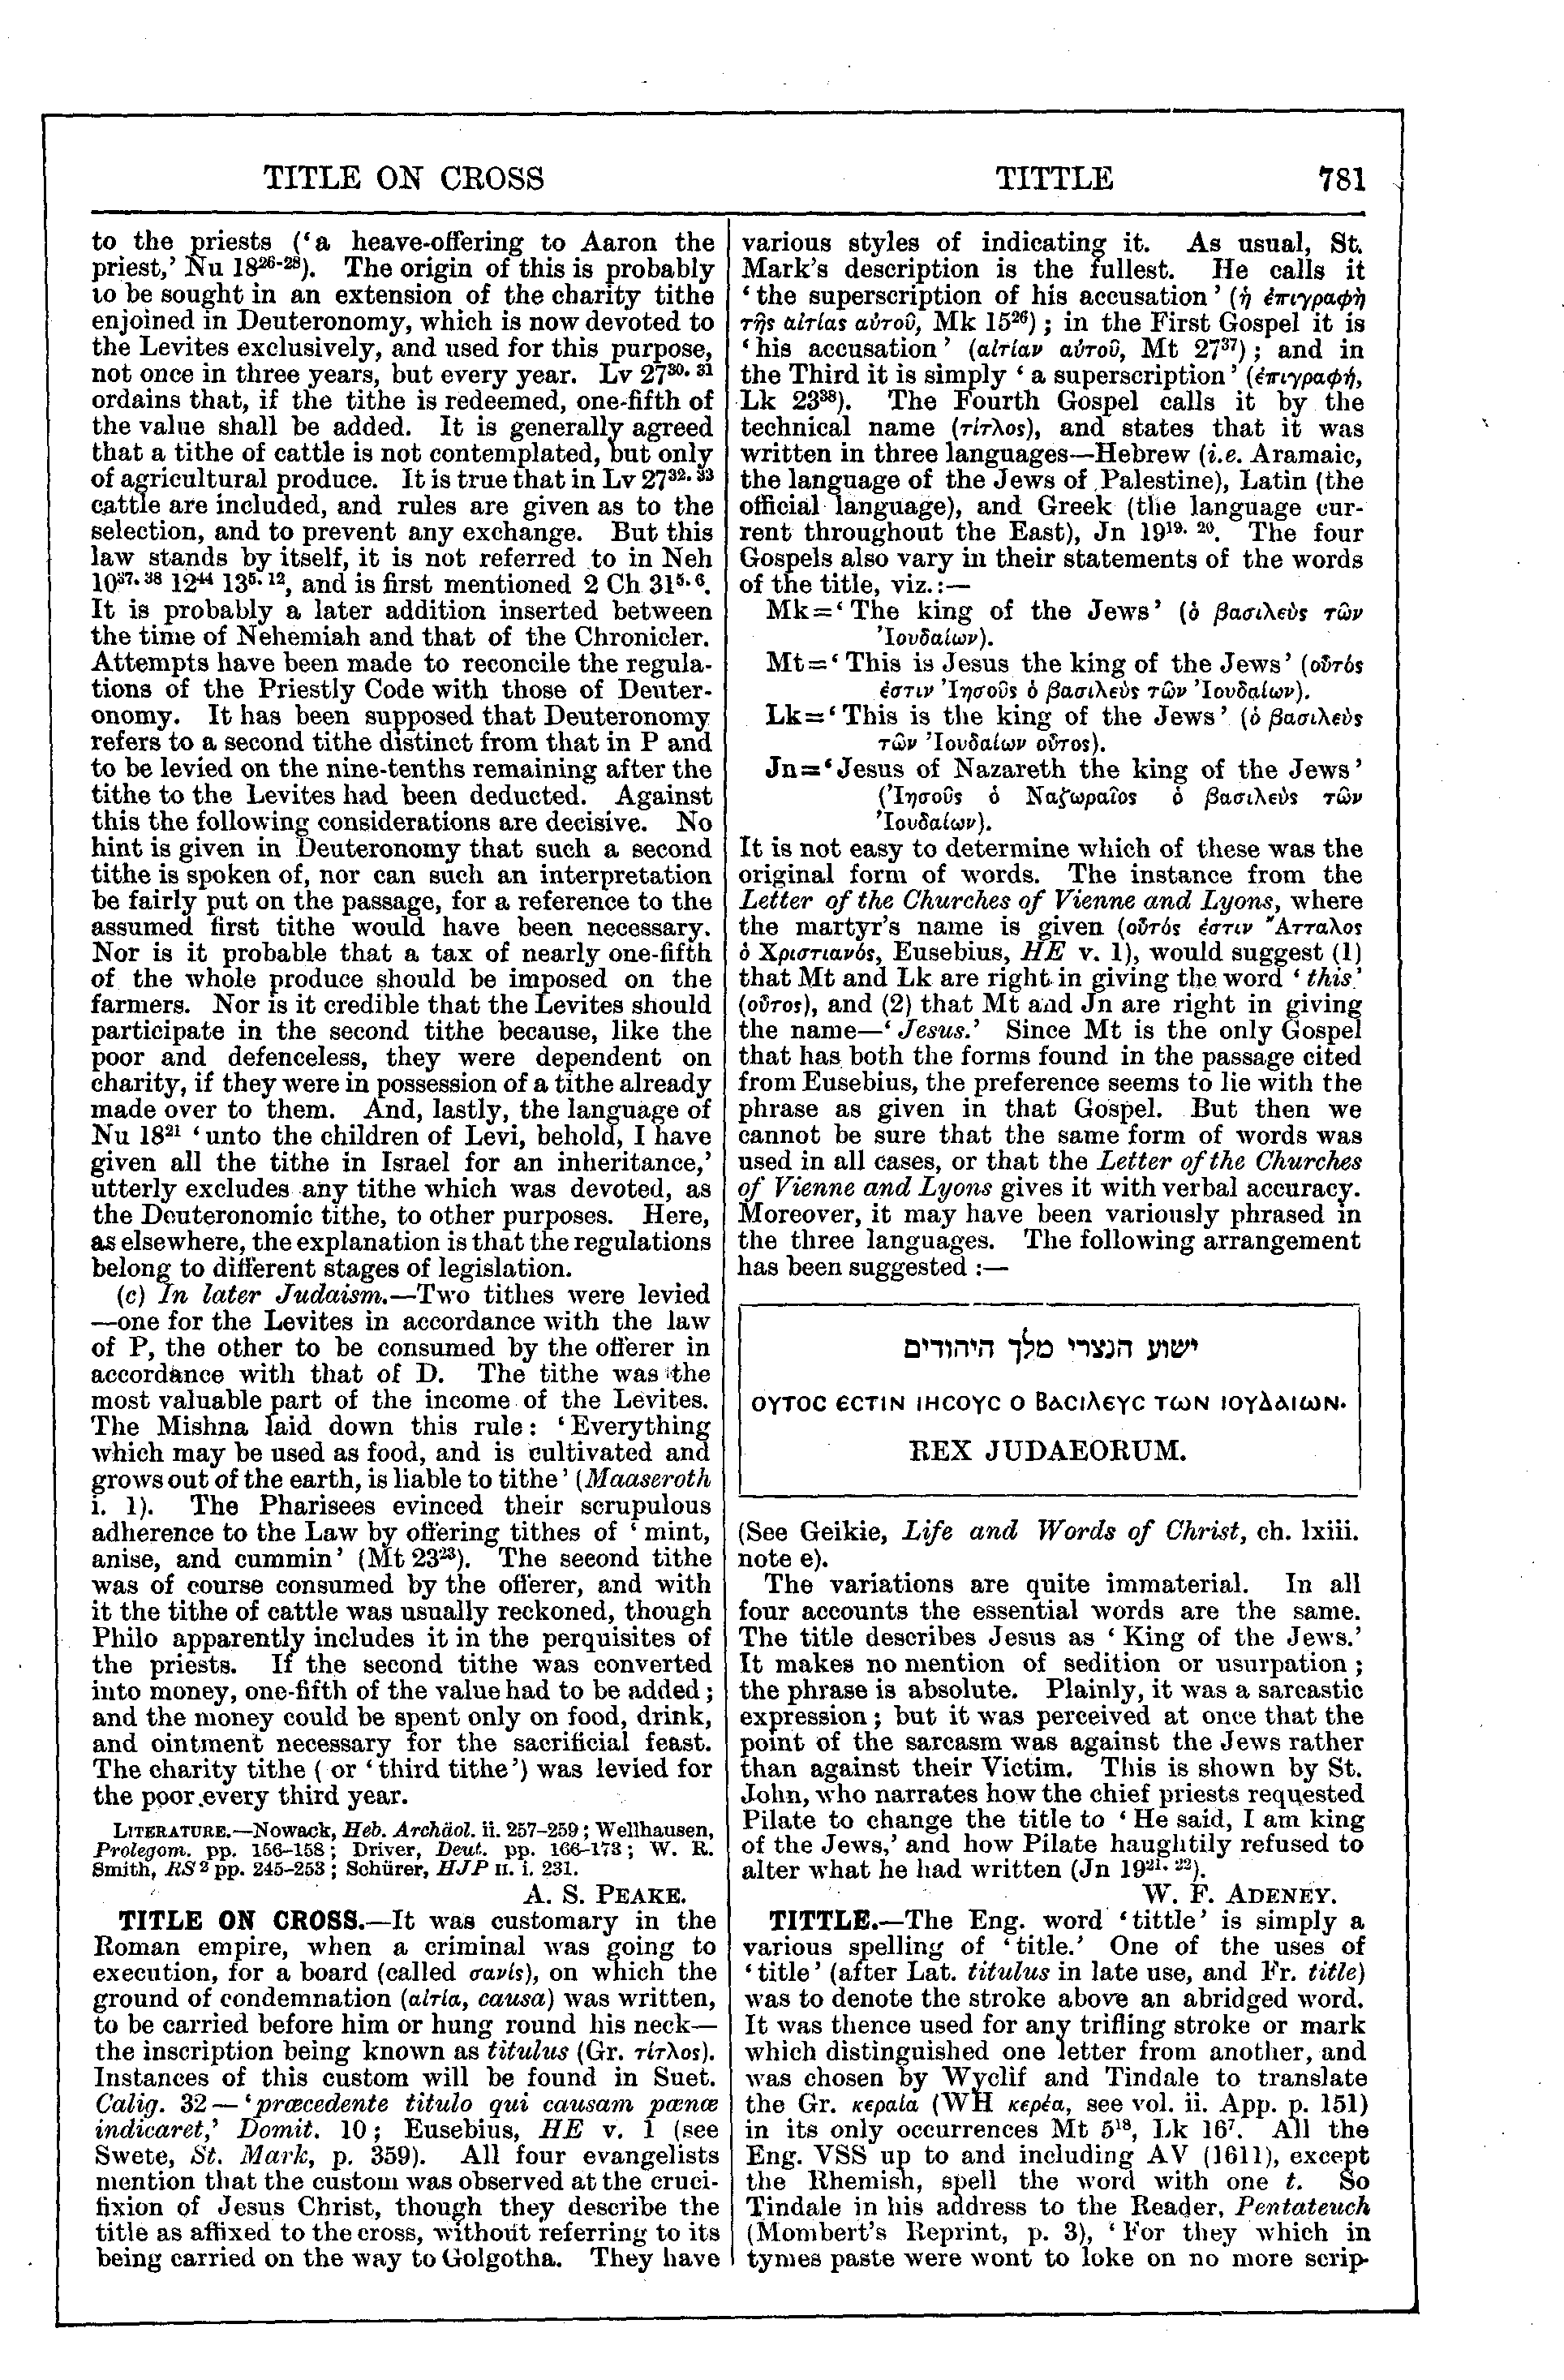 Image of page 781